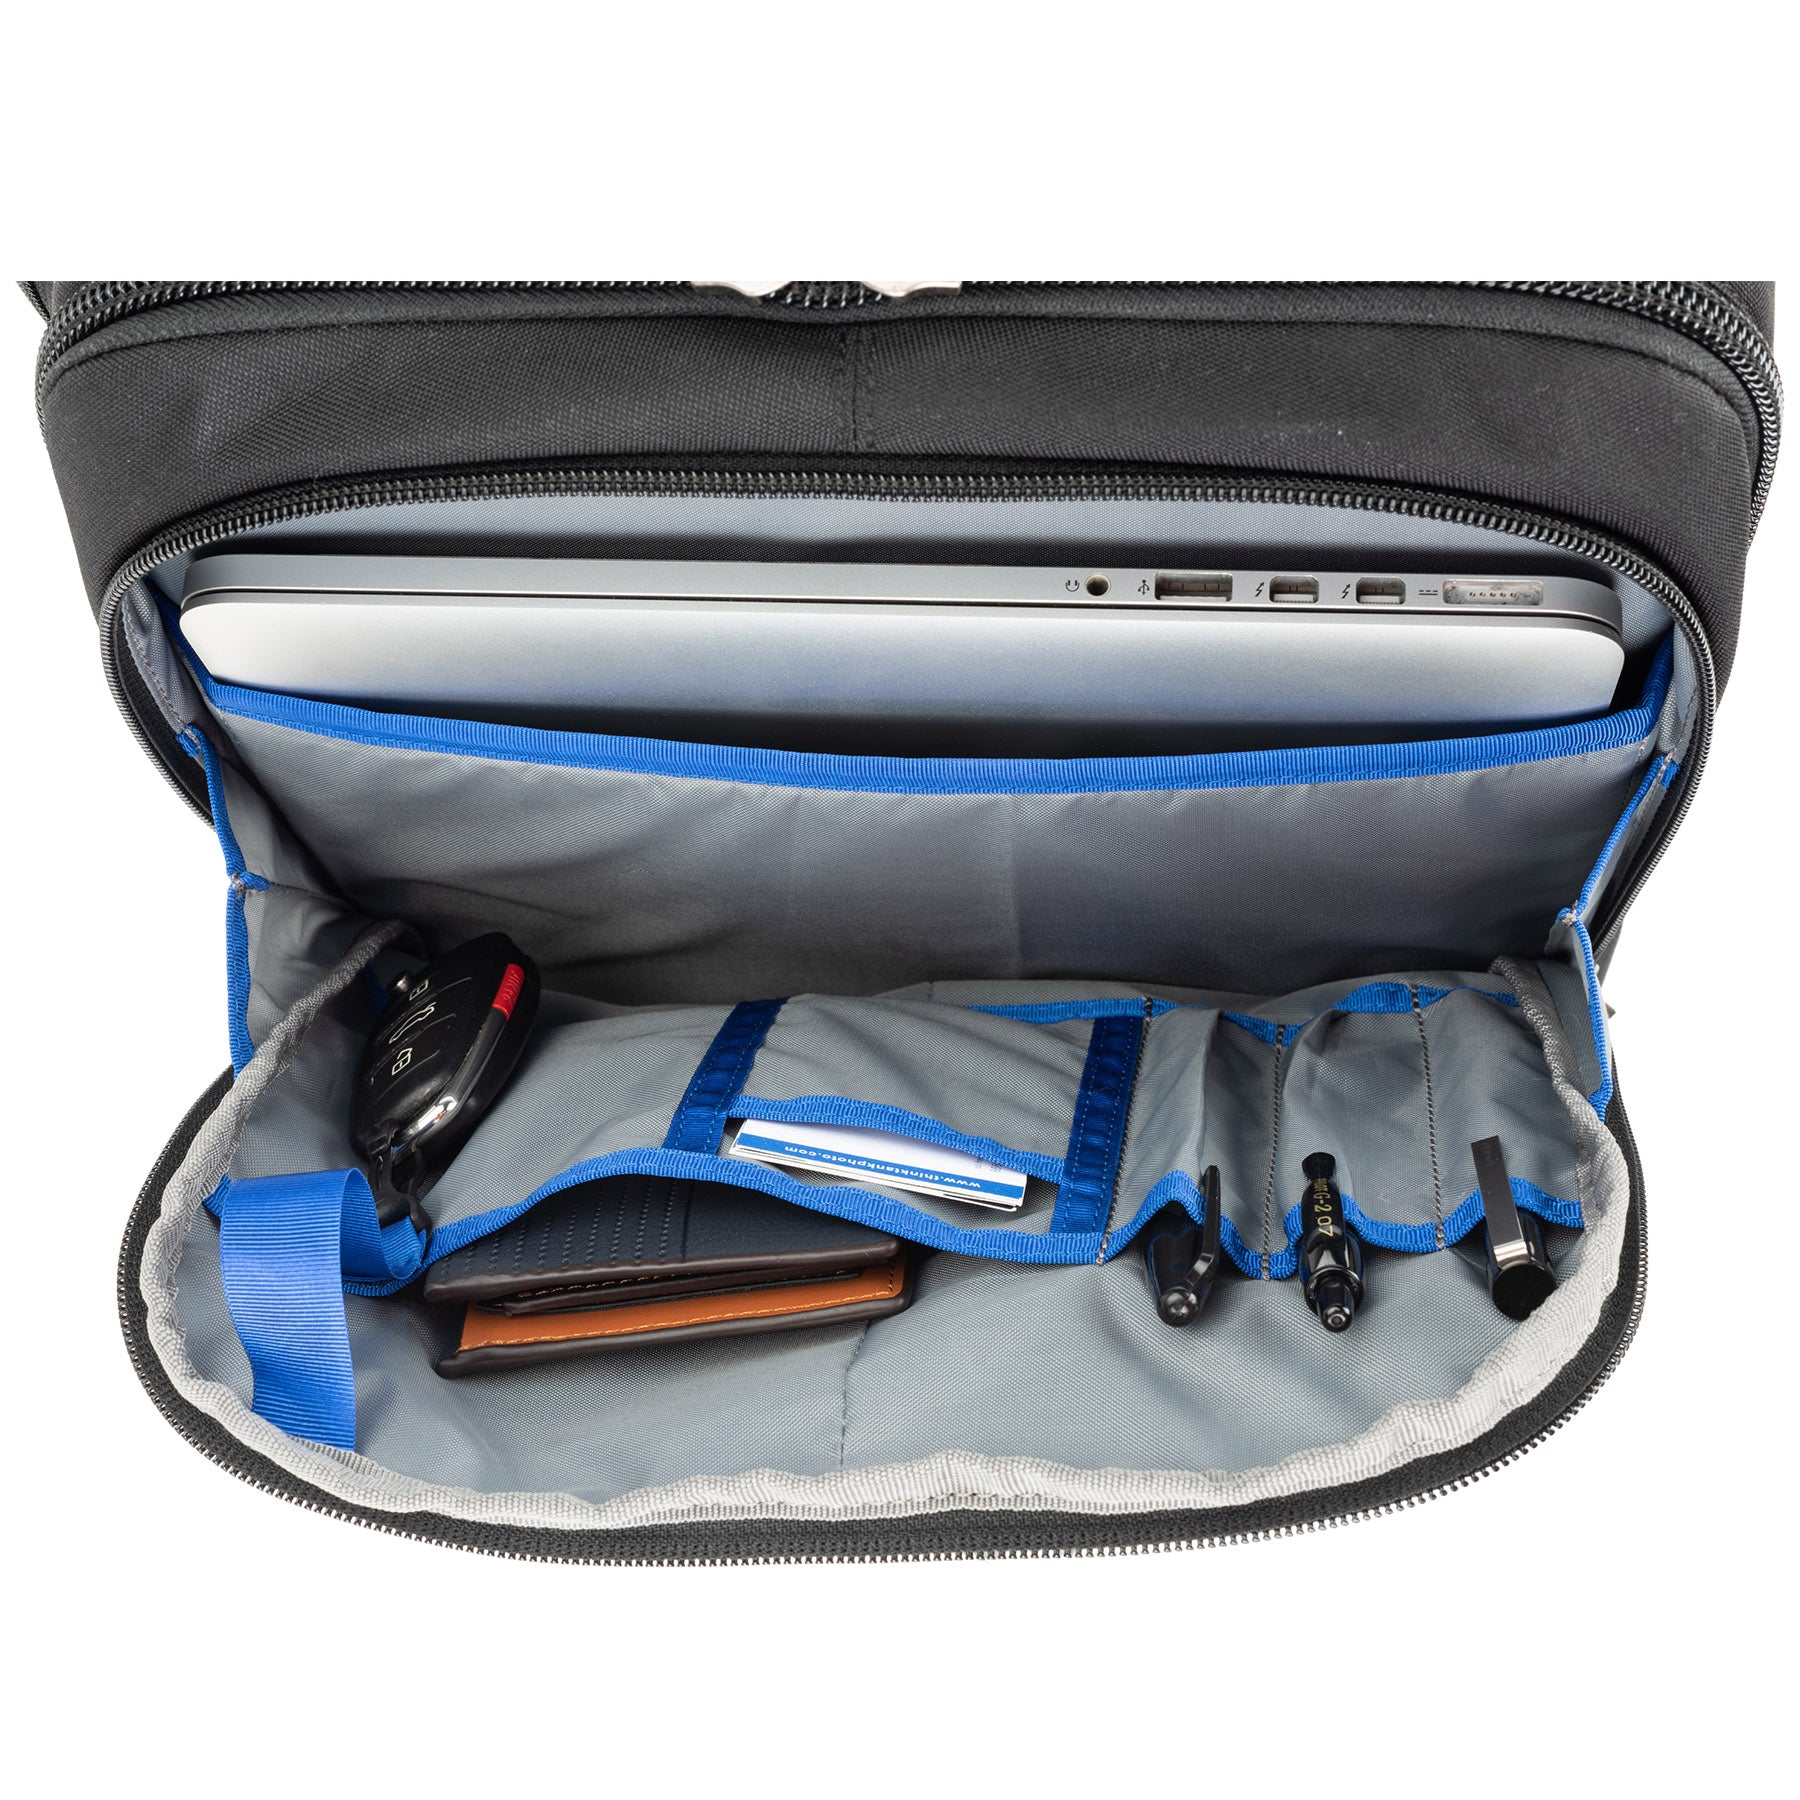 Dedicated laptop compartment fits up to a 16-inch laptop